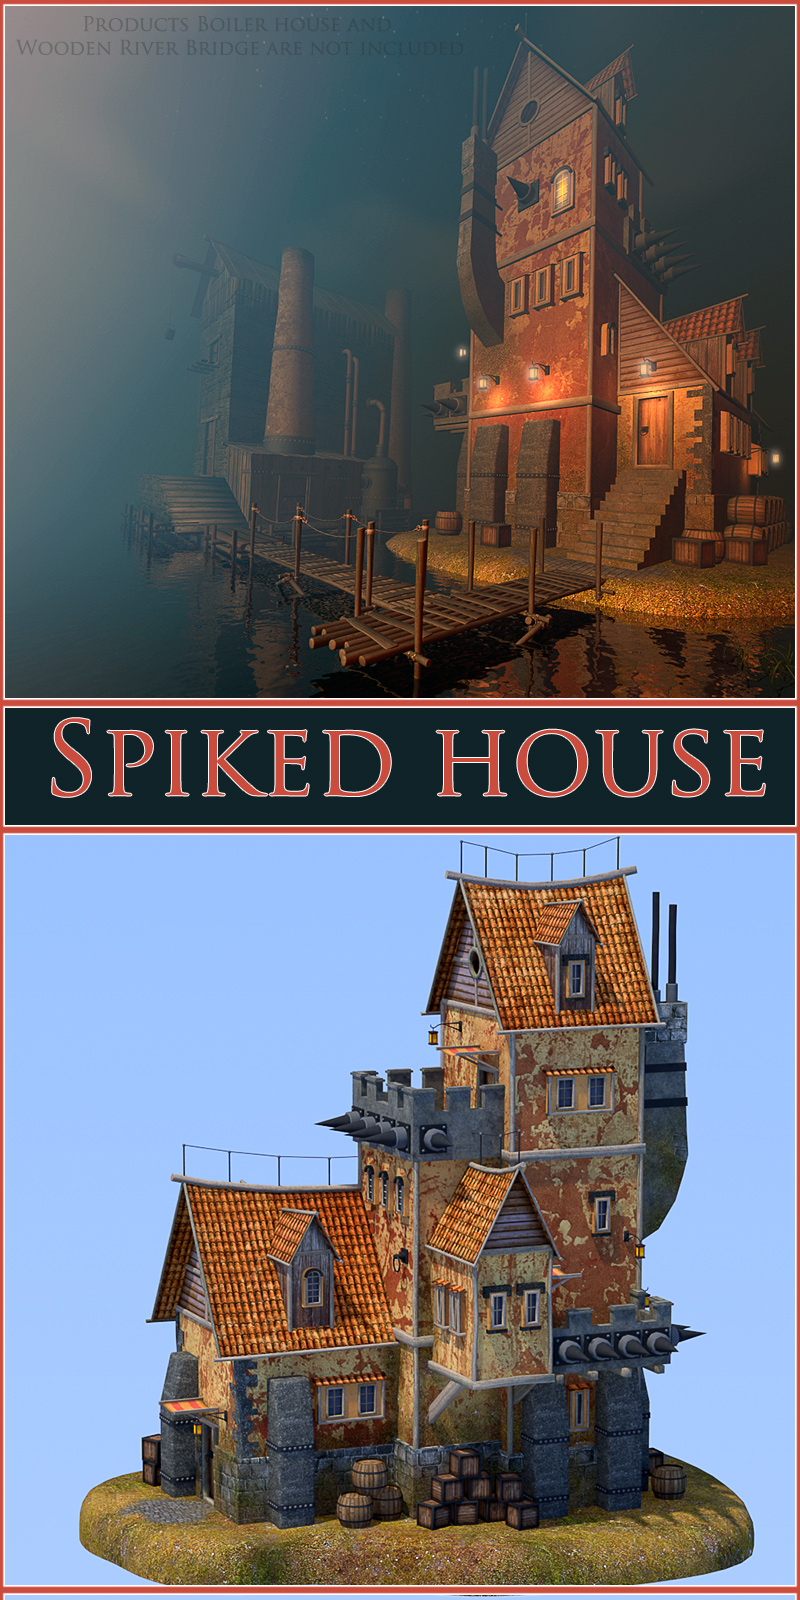 Spiked house